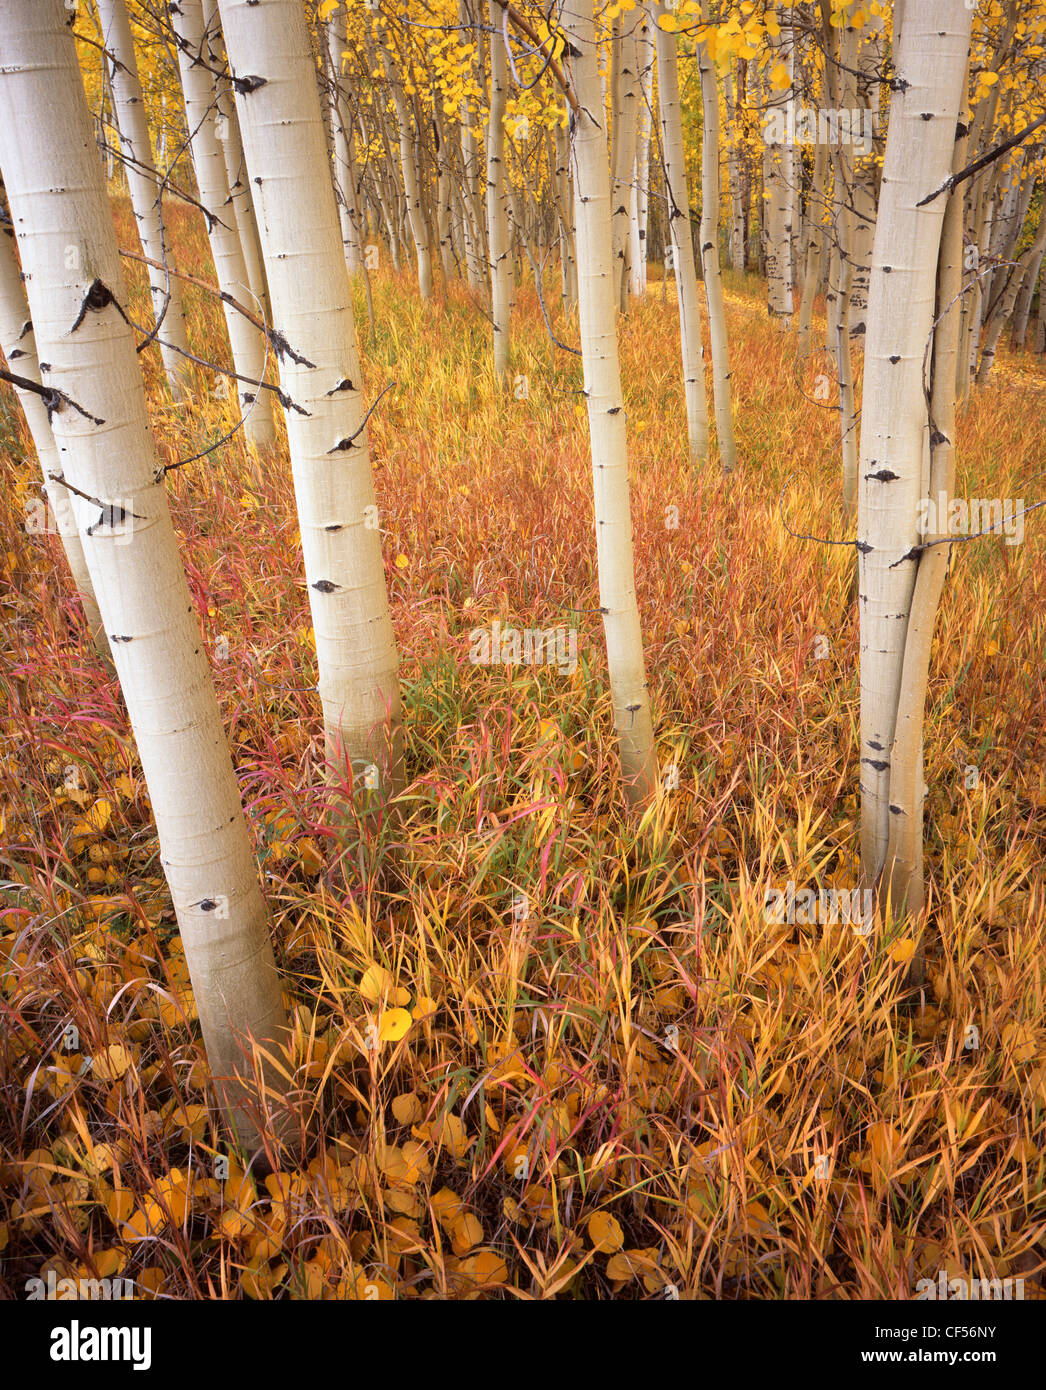 Fall color comes to aspens, grasses and ferns near Telluride in Colorada Stock Photo